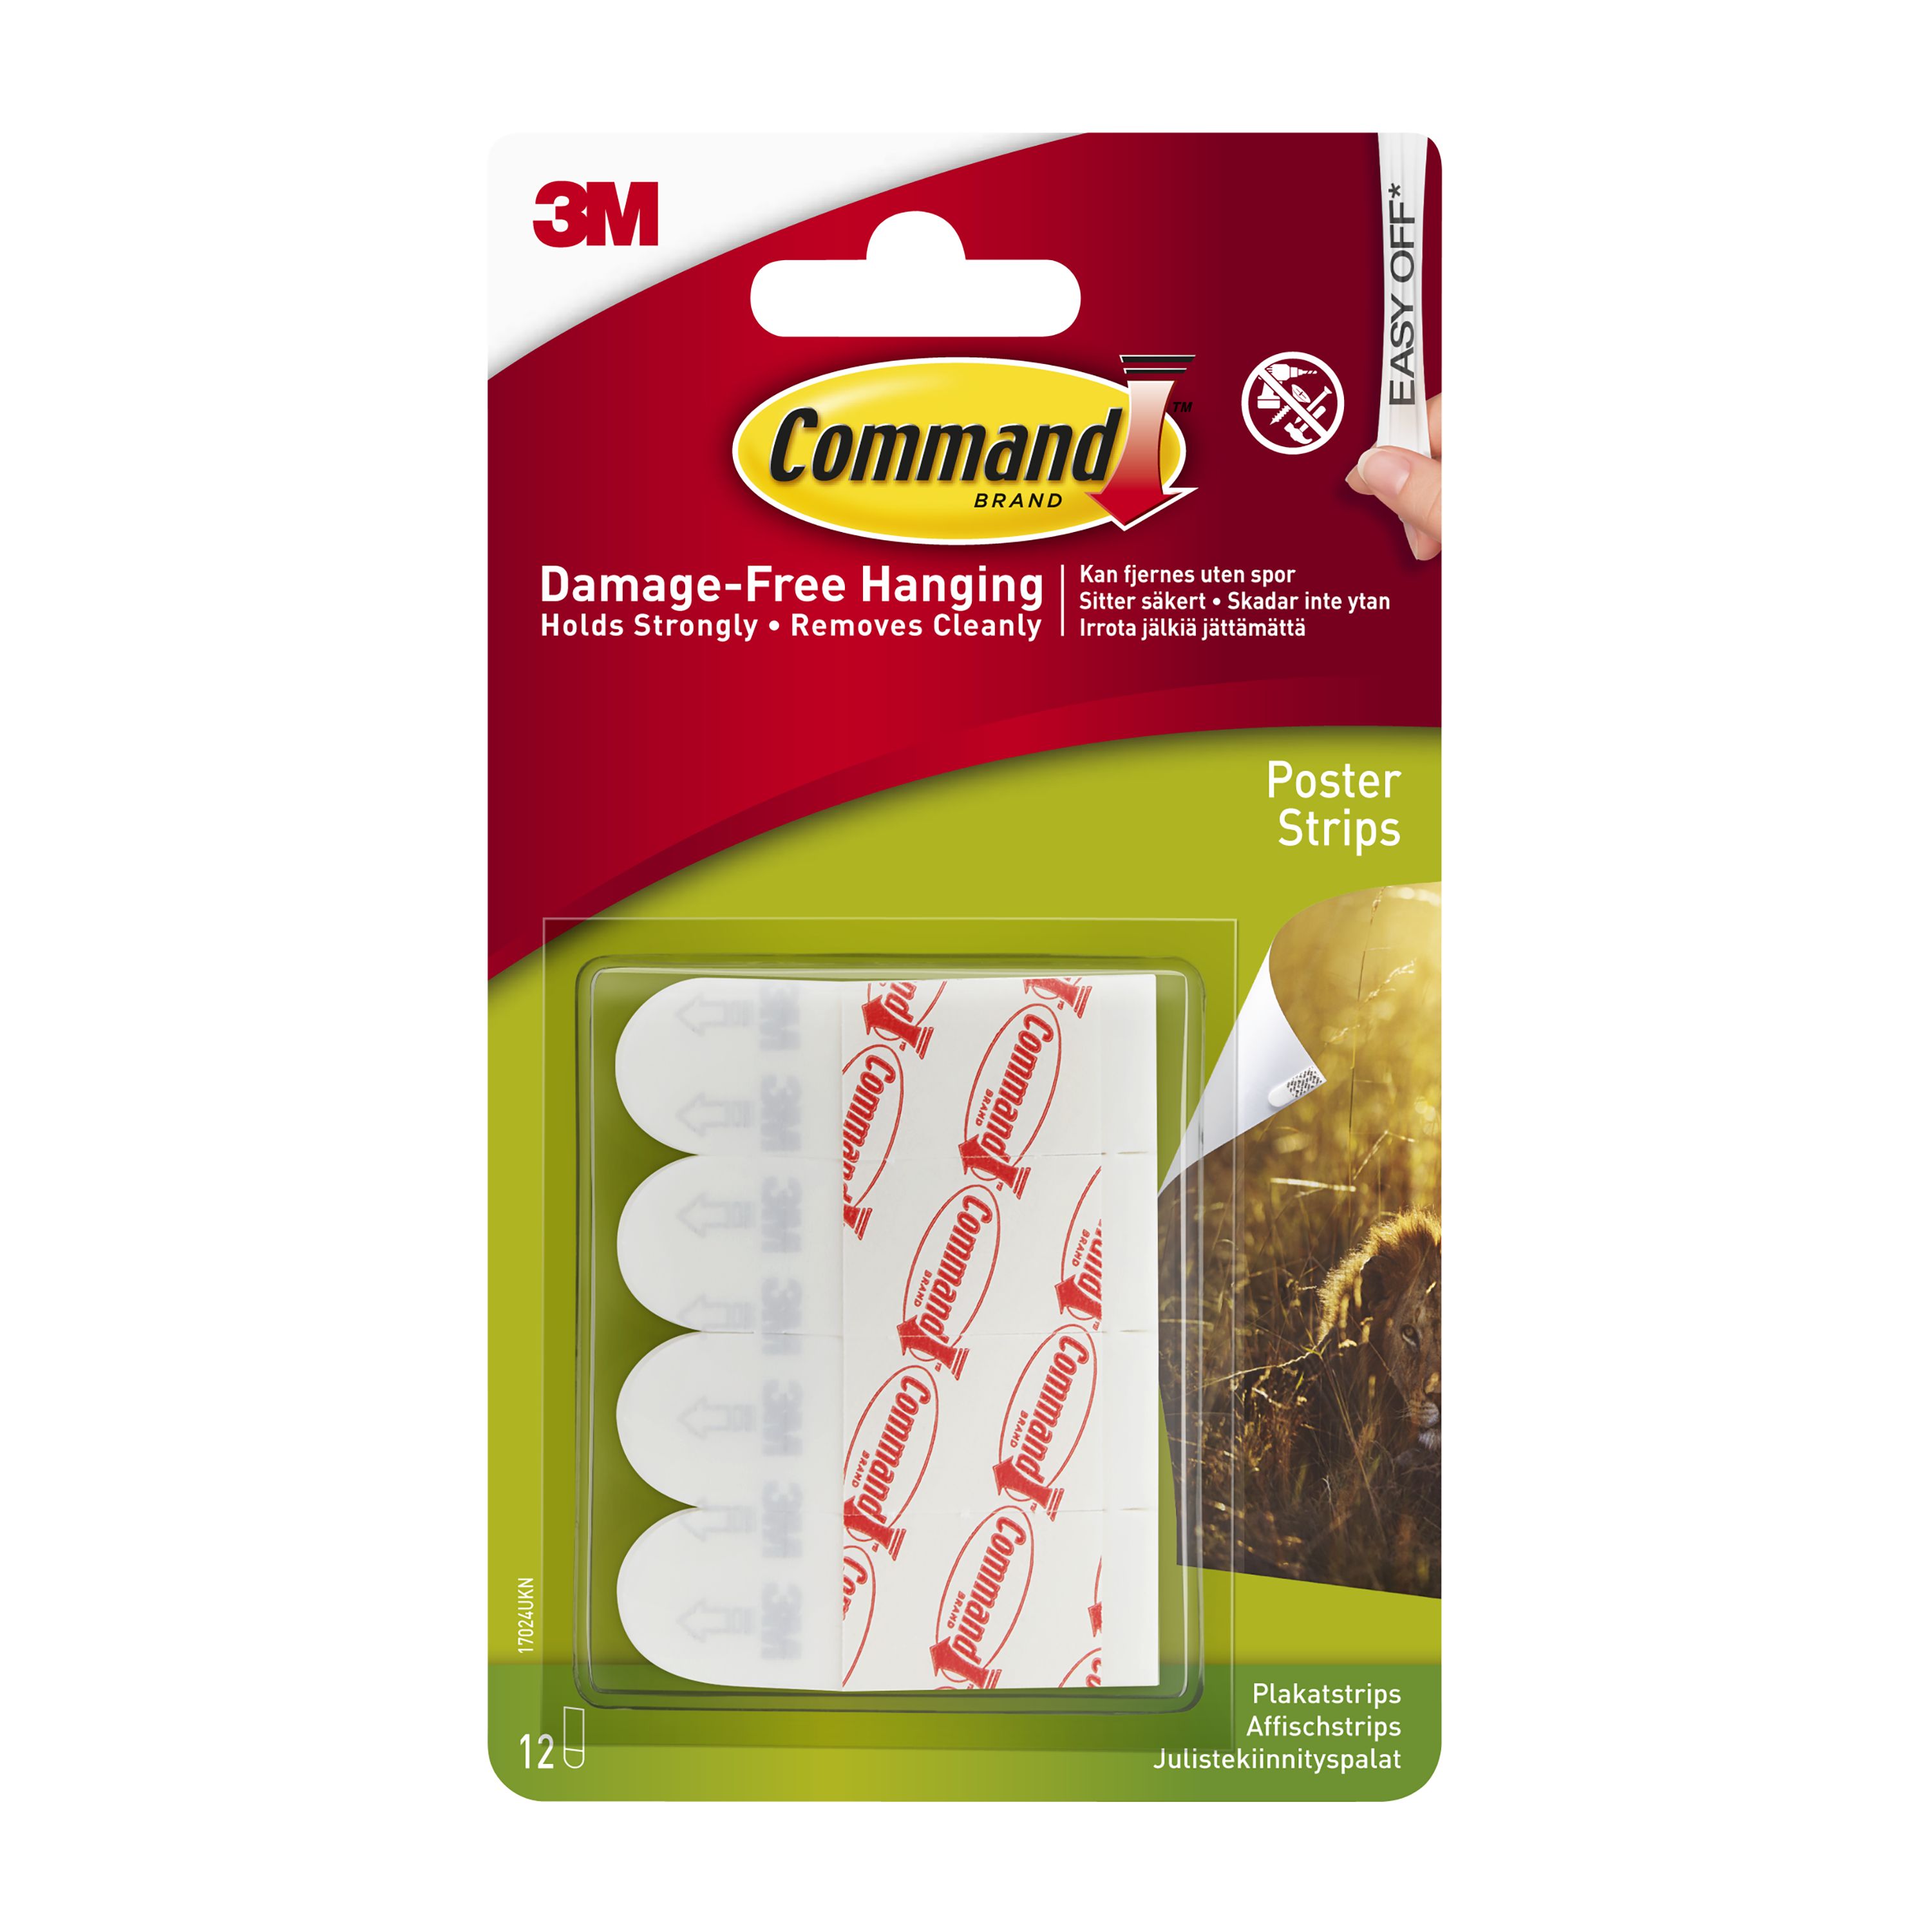 Command 3M, Wall Hooks, Upto 1.3kg, Multi-Surface Hooks for Hanging (White,  2 Hooks, 4 Strips) andCommand Large Picture Hanging Strips,4 Pairs, Holds